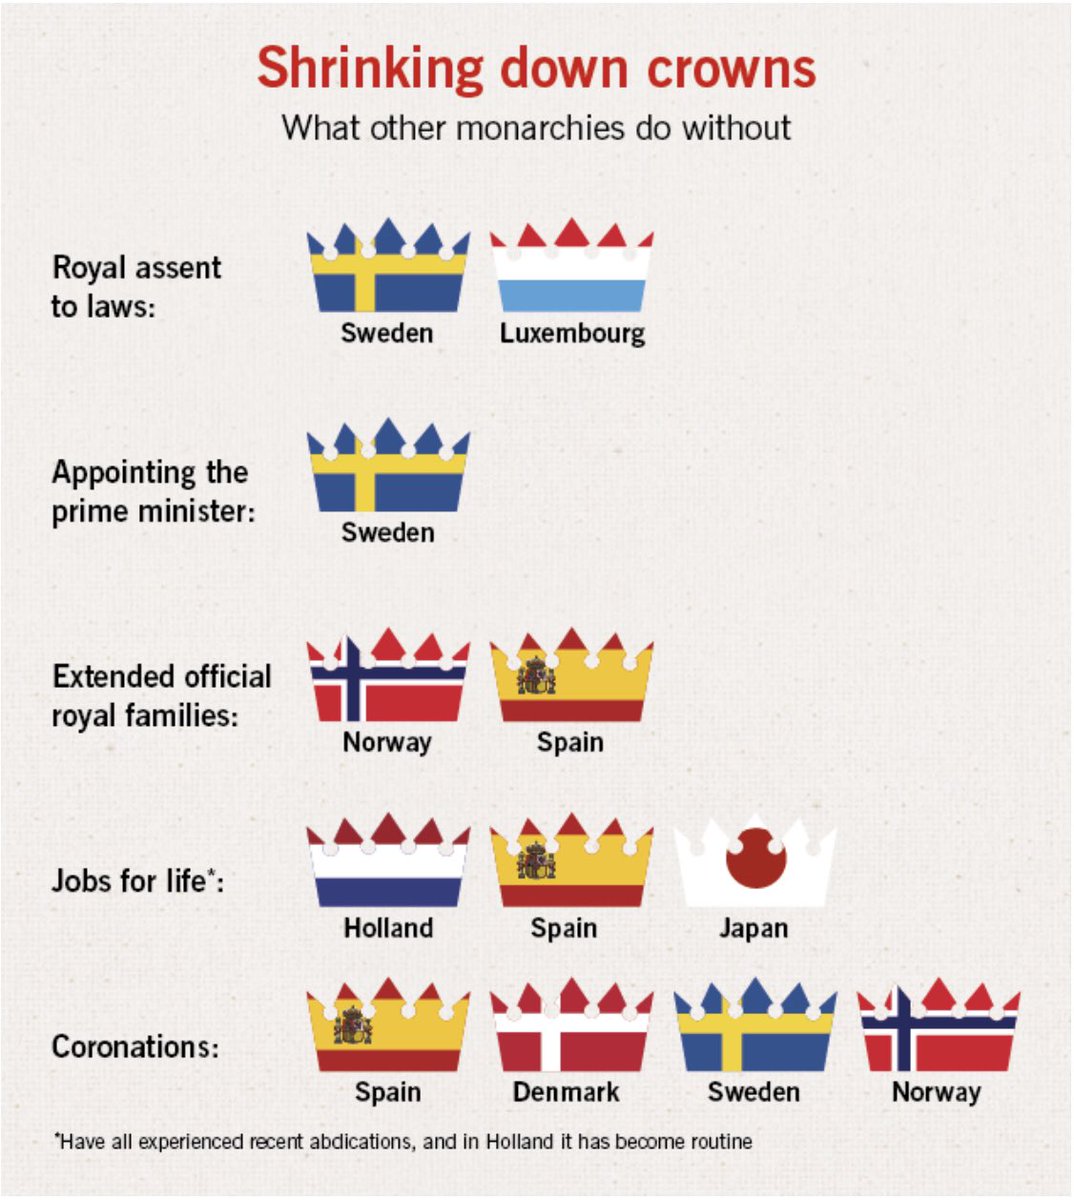 10.Our democracy needs “less Crown”Sweden shows the way, having put parliament fully in charge in its 1974 constitutions But plenty of other monarchies also have useful tips for modernising